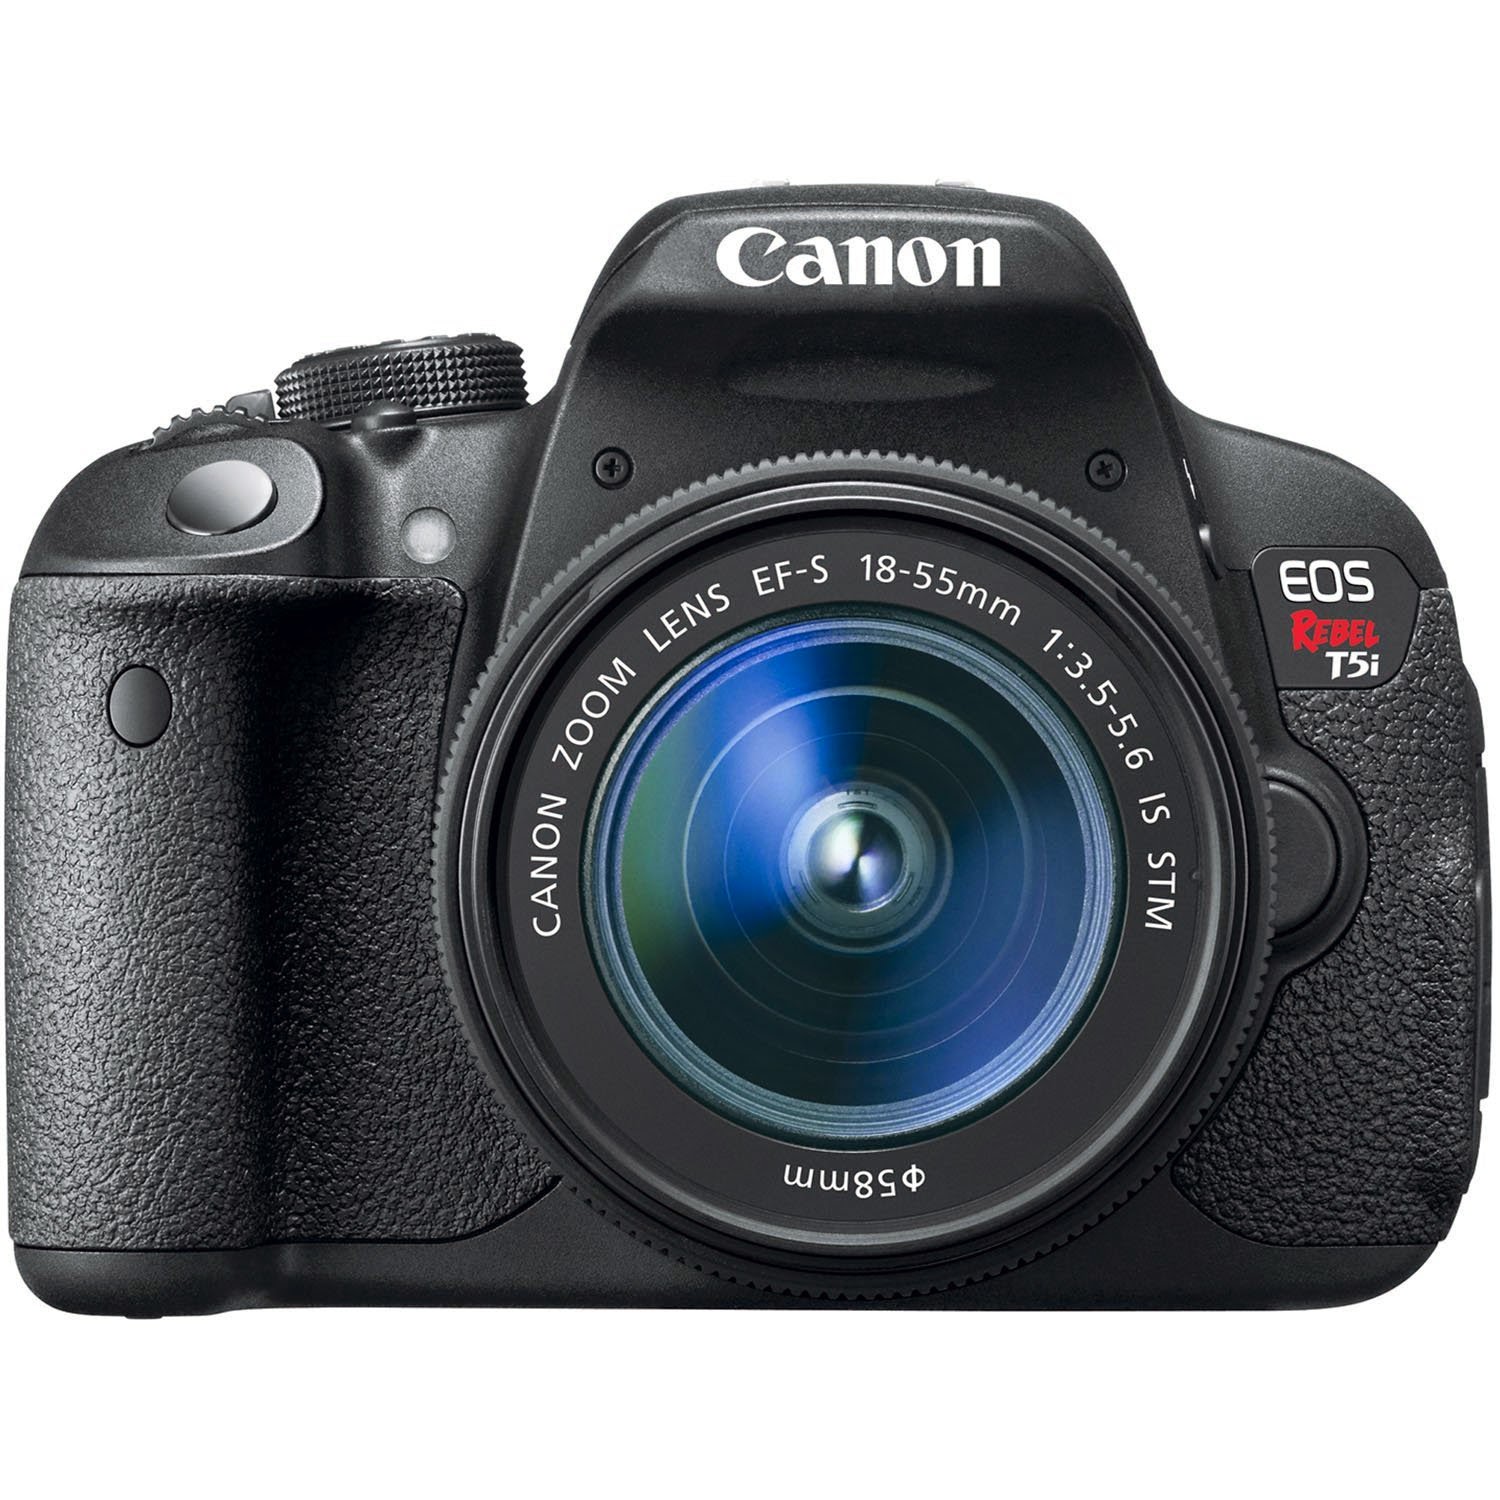 Canon EOS Rebel T5i Digital SLR Camera, review features, also known as EOS 700D and Kiss X7i